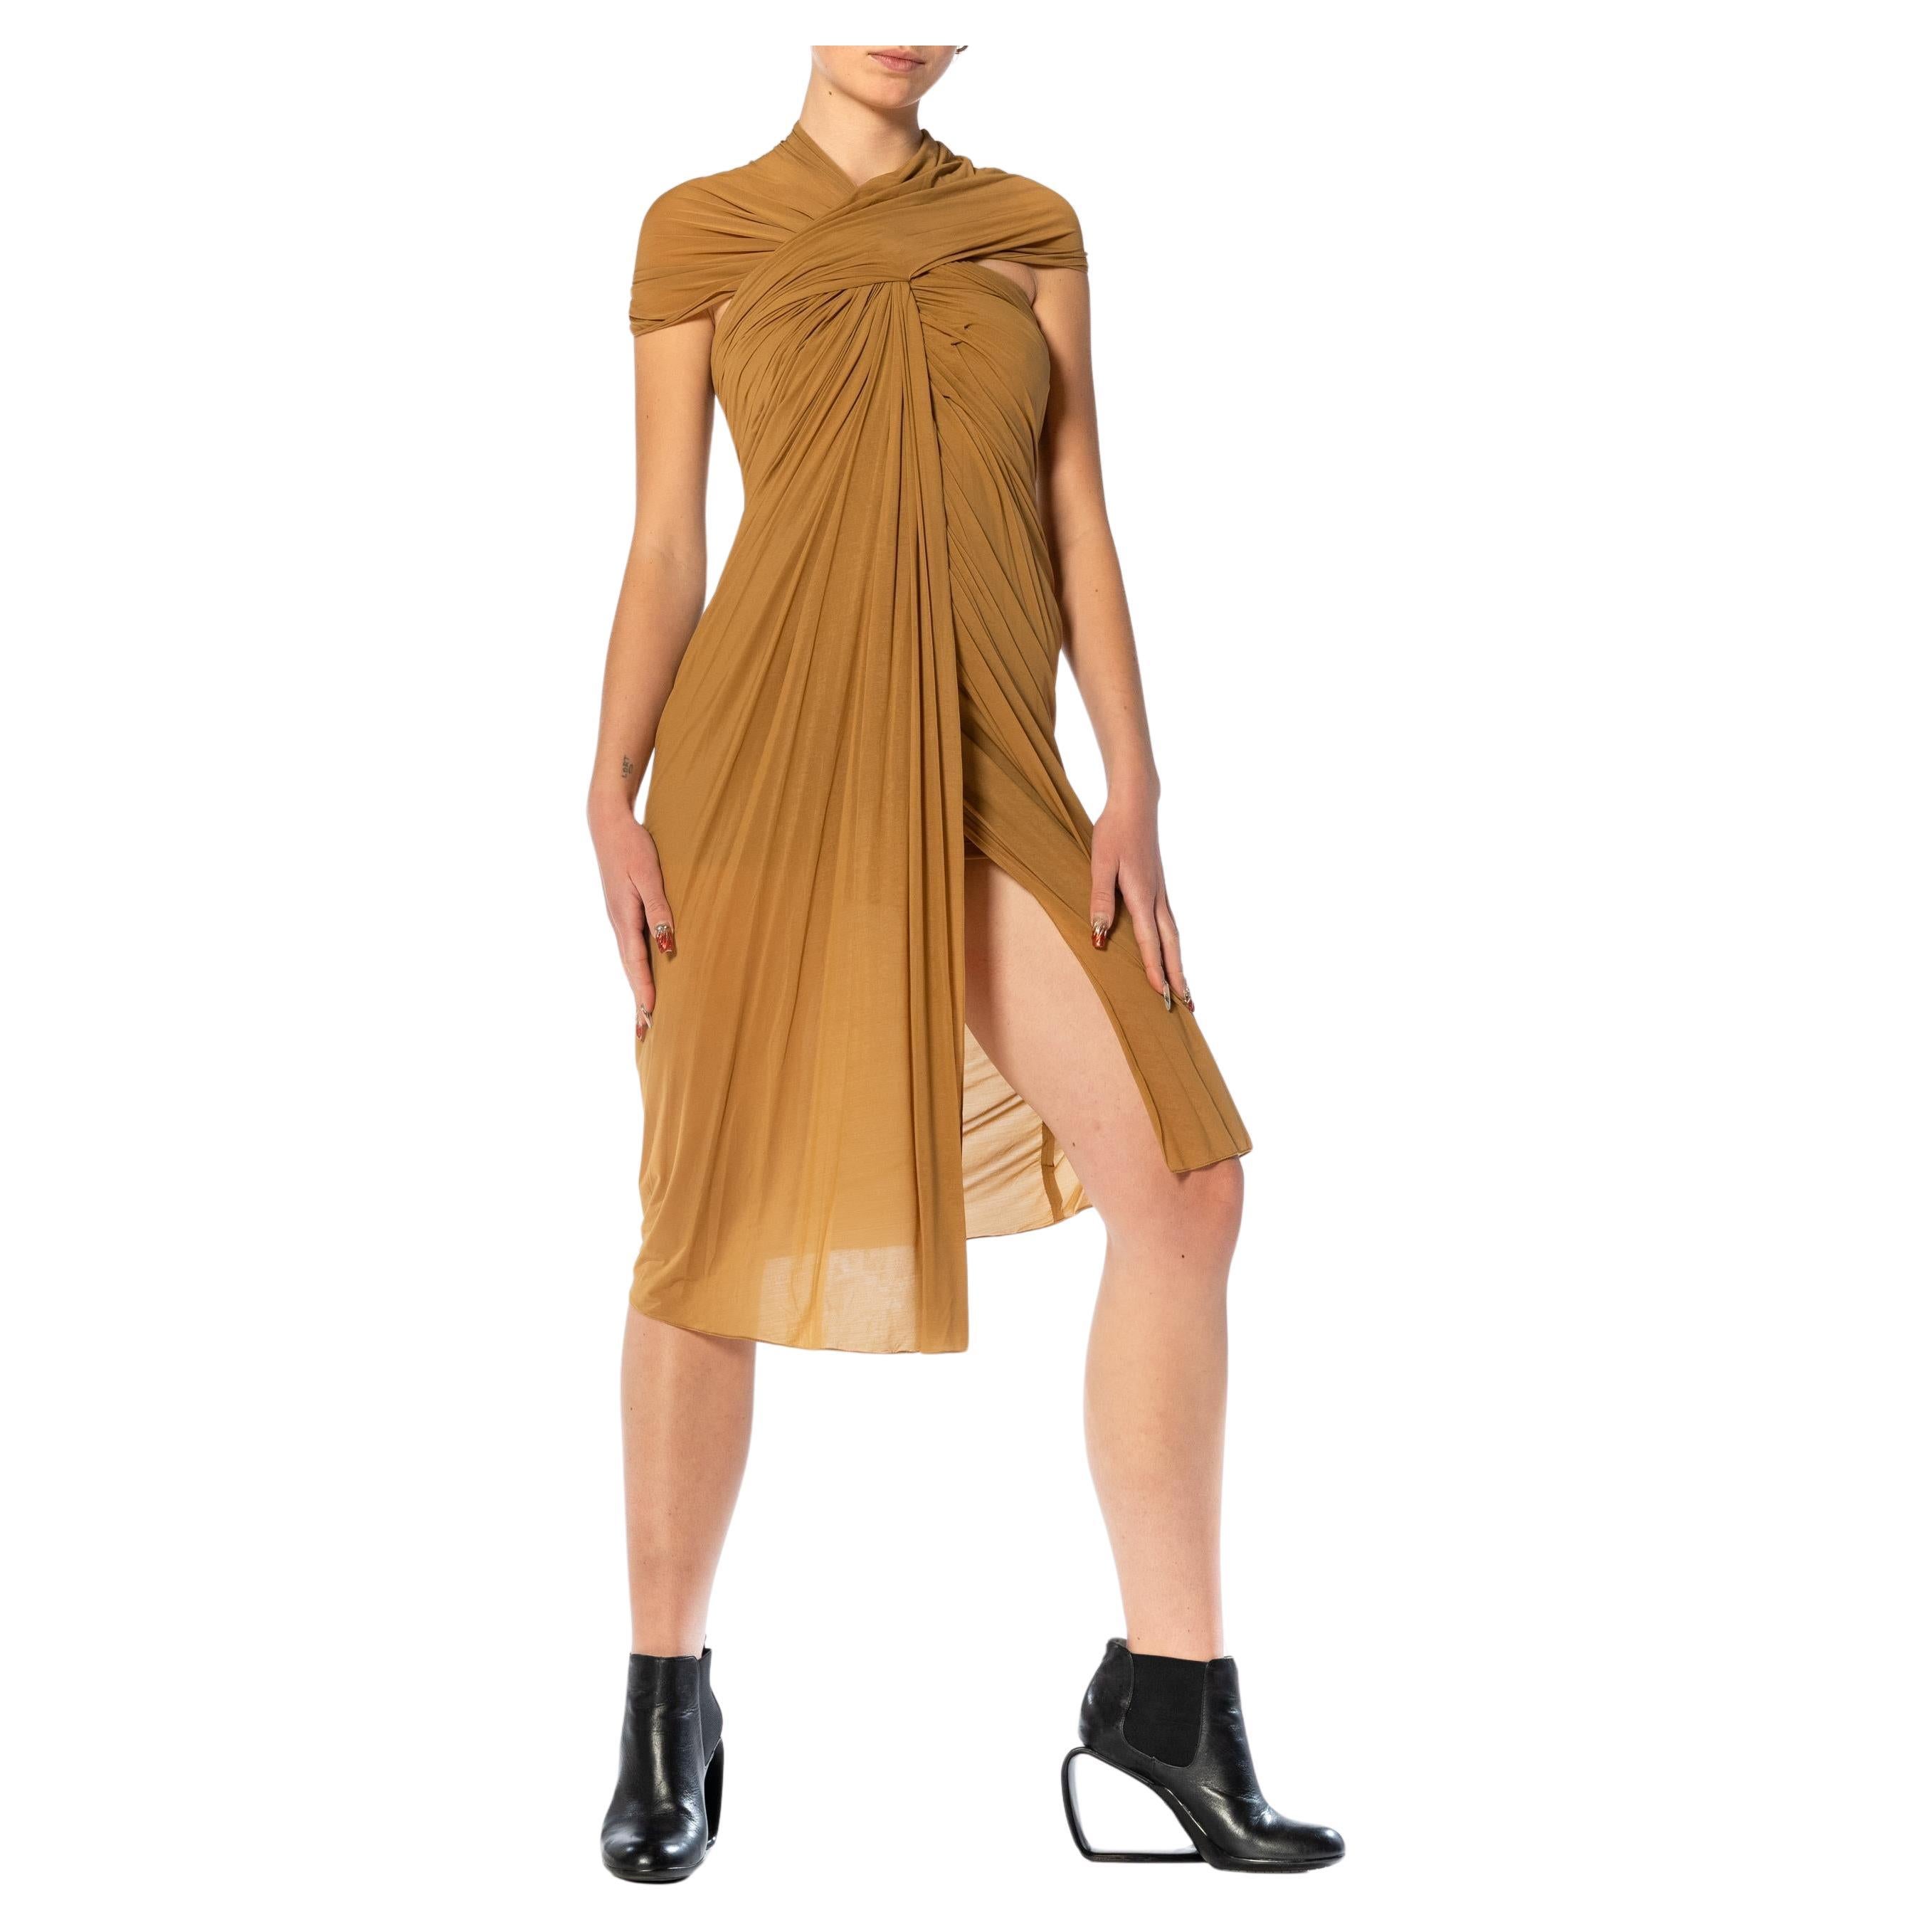 1990S DONNA KARAN Camel Cupro & Spandex Draped One Shoulder Cocktail Dress In Excellent Condition For Sale In New York, NY